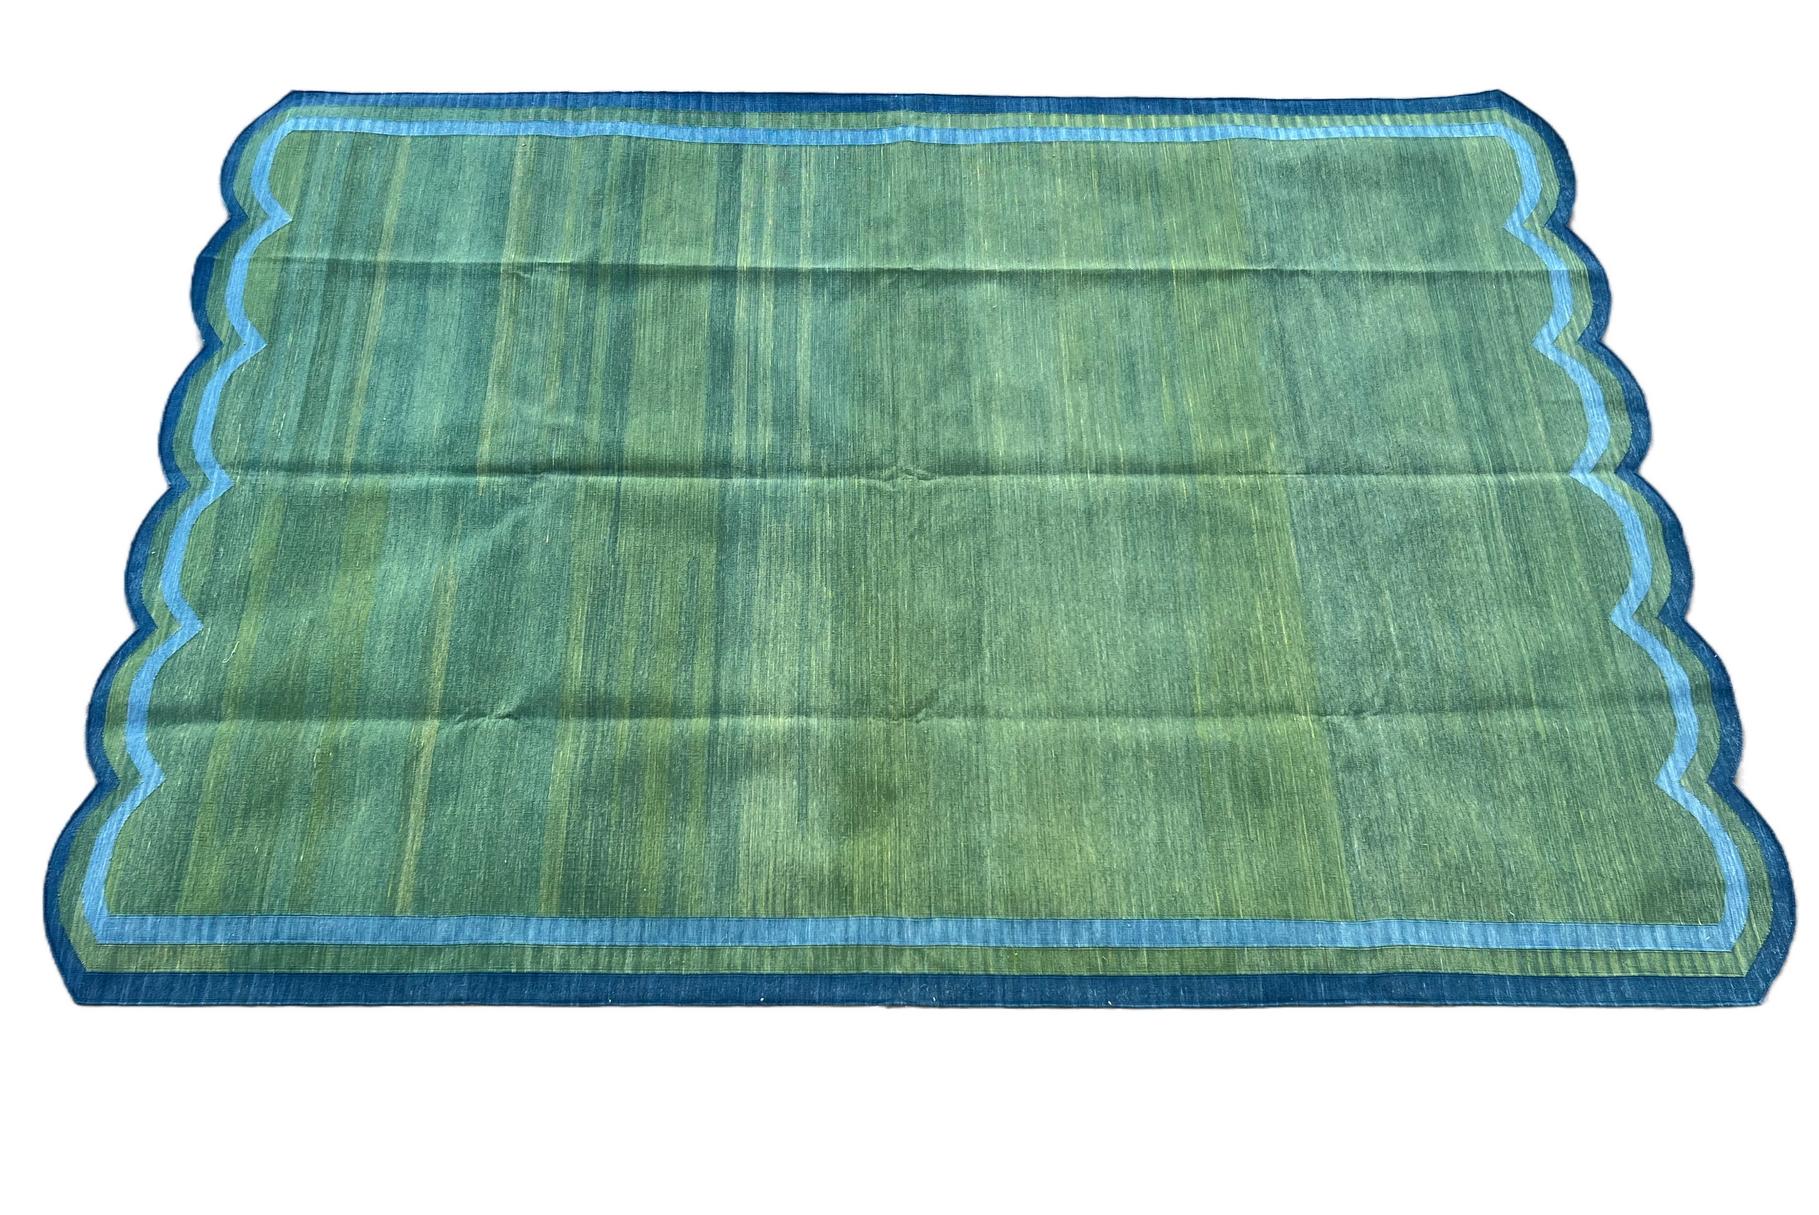 Mid-Century Modern Handmade Cotton Area Flat Weave Rug, 6x9 Green And Blue Scallop Striped Dhurrie For Sale